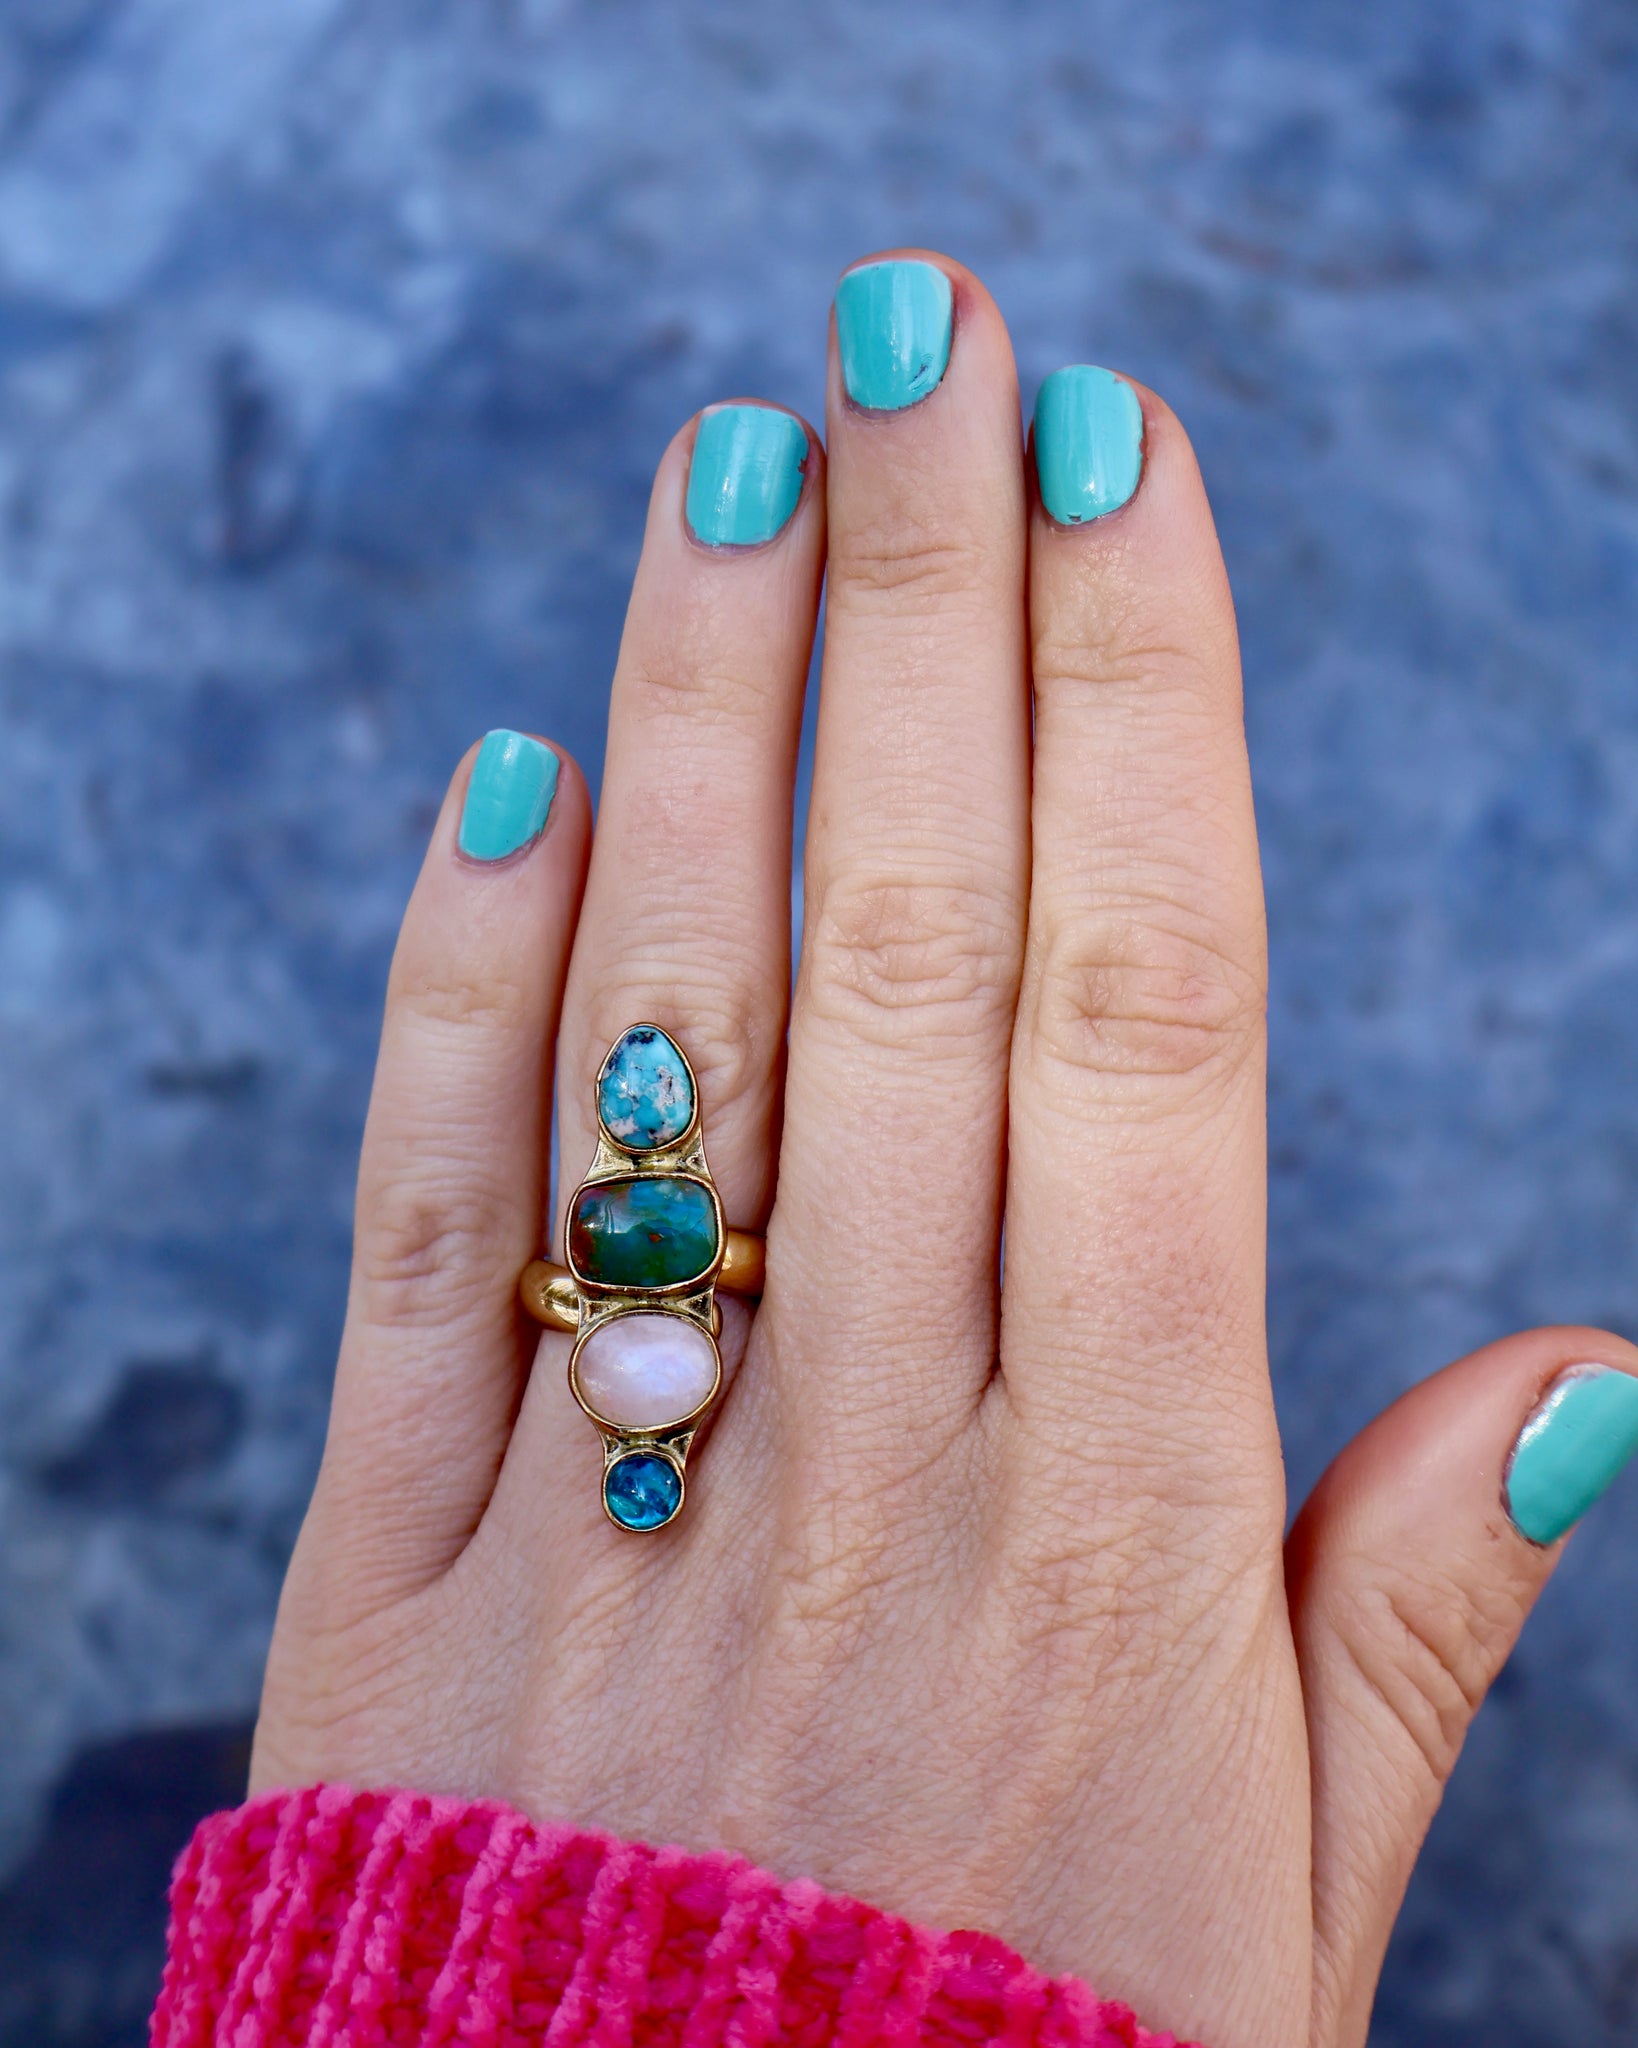 Winter Thaw Ring Neon Apatite, Peruvian Opal & Turquoise in Gold Alchemia, Adjustable Size WT9